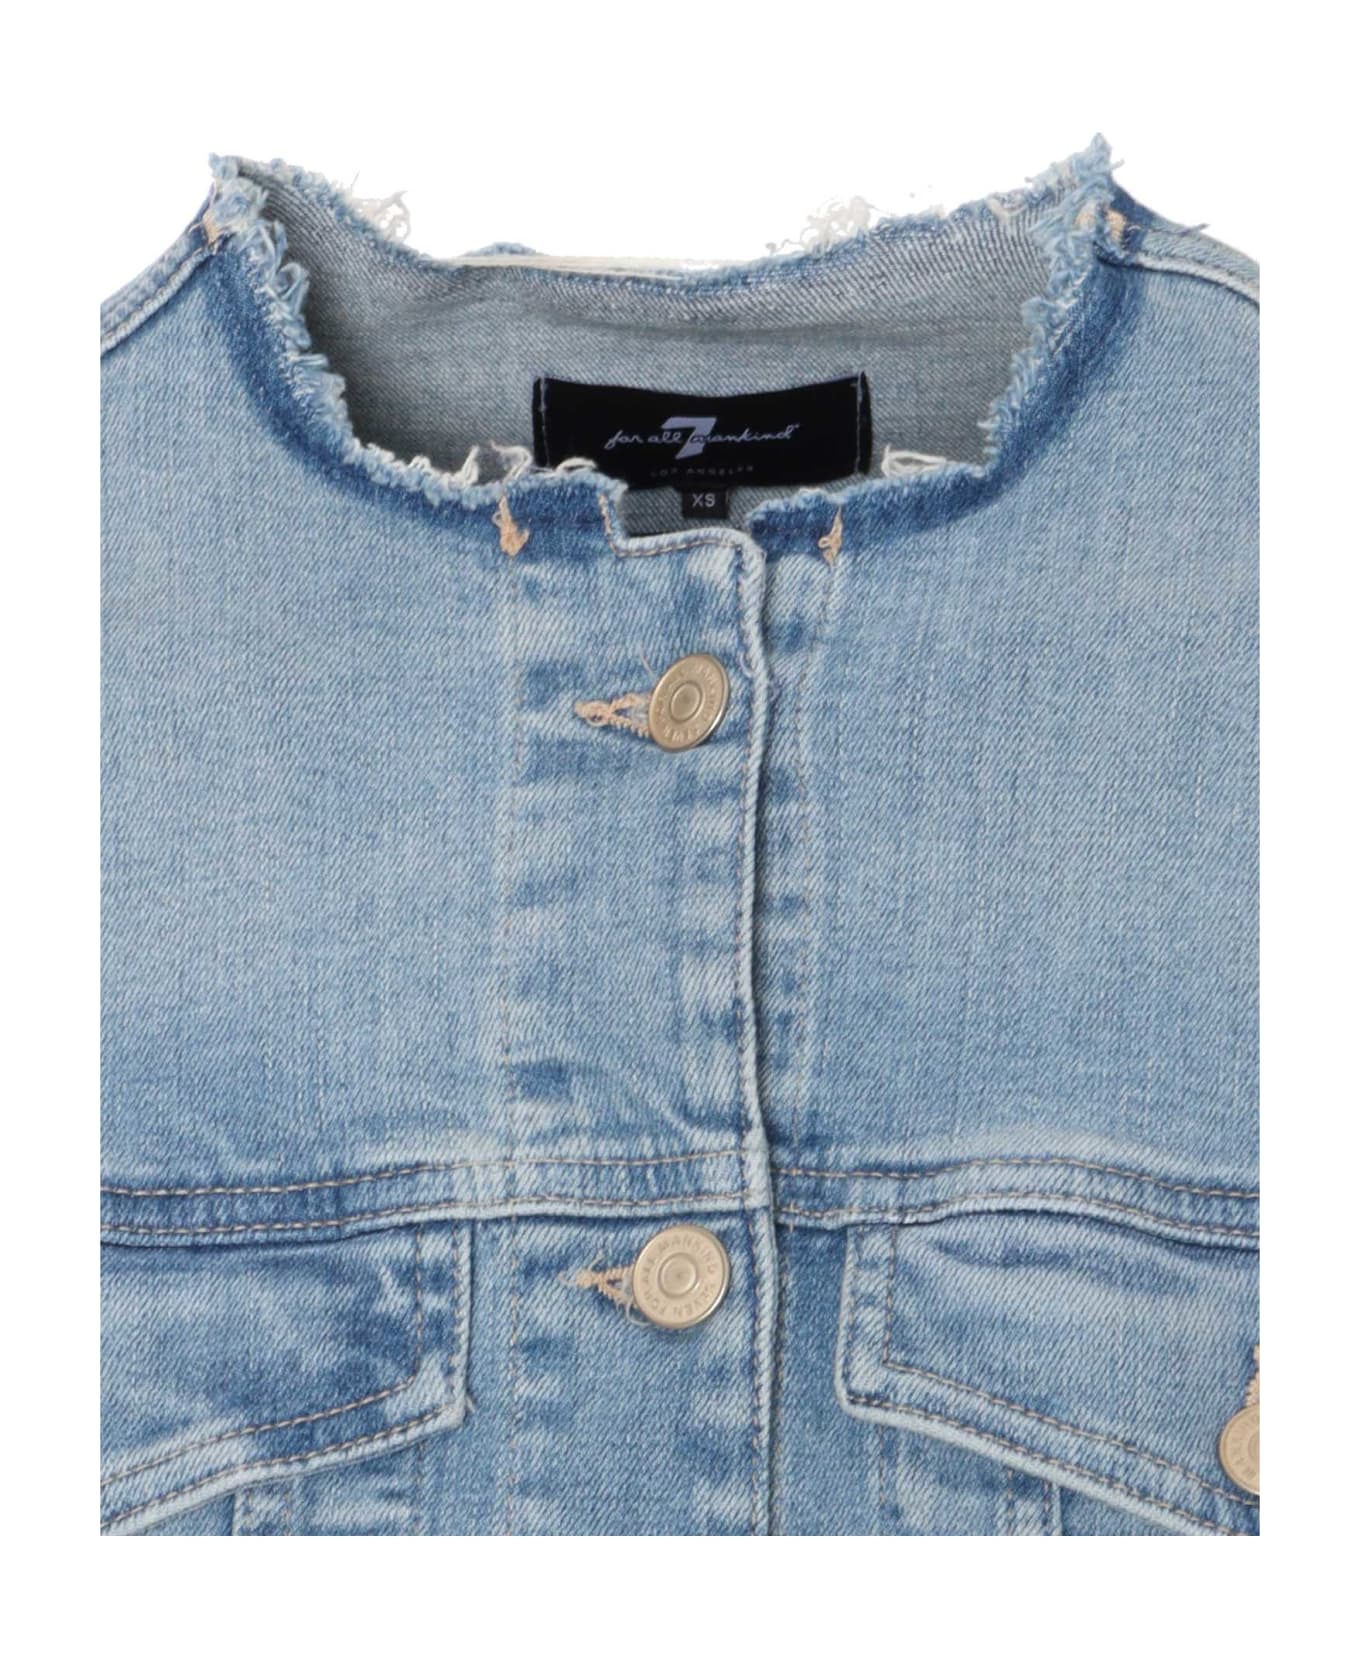 7 For All Mankind Coco Denim Jacket - BLUE